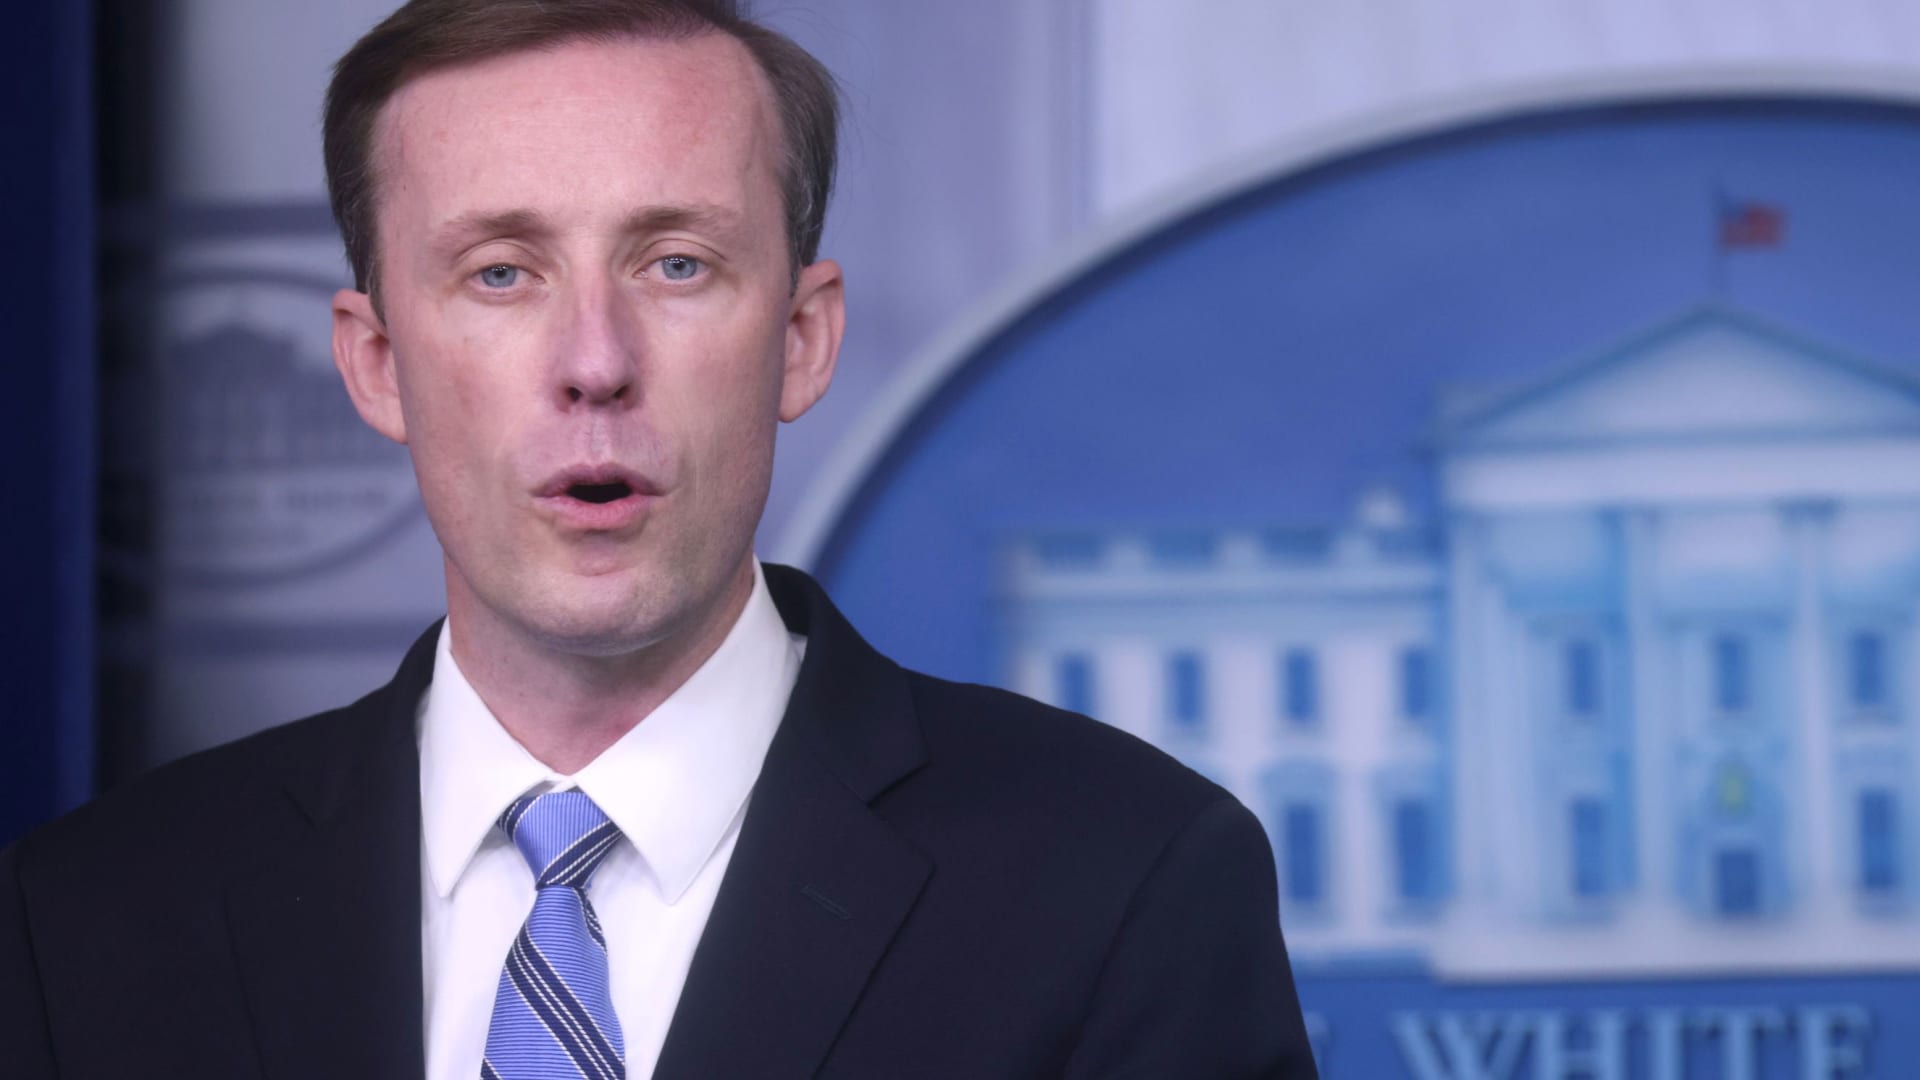 U.S. national security adviser Jake Sullivan gives a statement about the situation in Afghanistan during a news briefing at the White House in Washington, August 23, 2021.